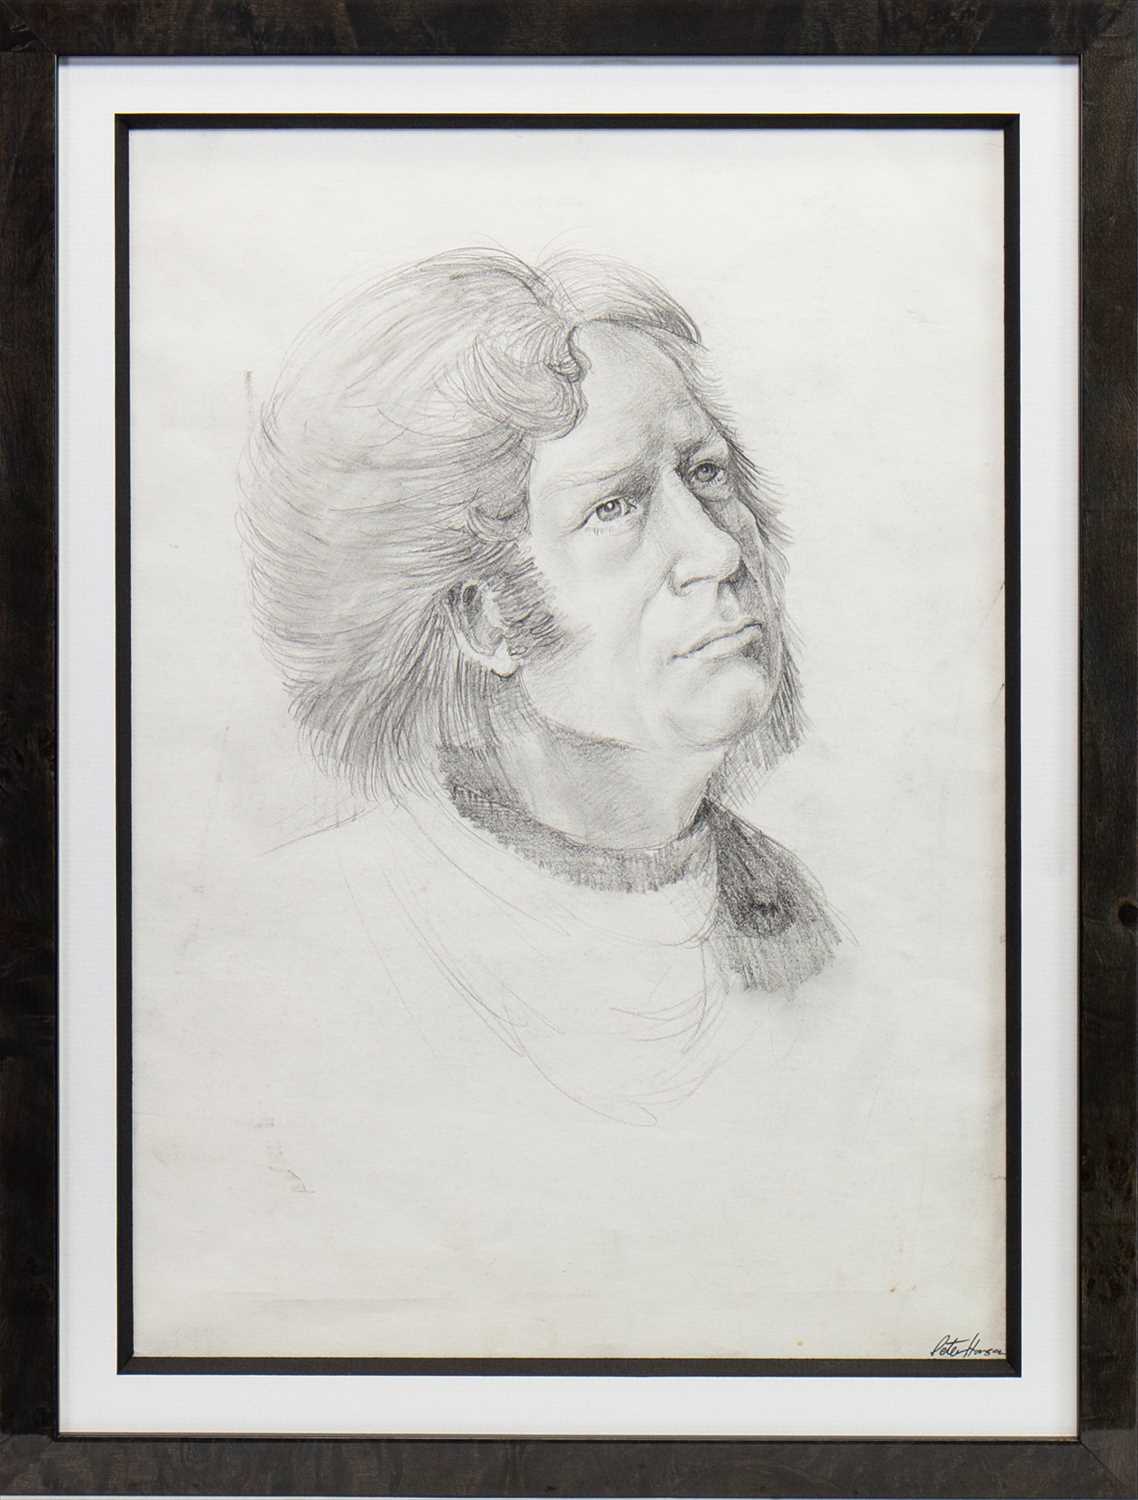 Lot 674 - AN EARLY PENCIL SKETCH OF A MAN BY PETER HOWSON